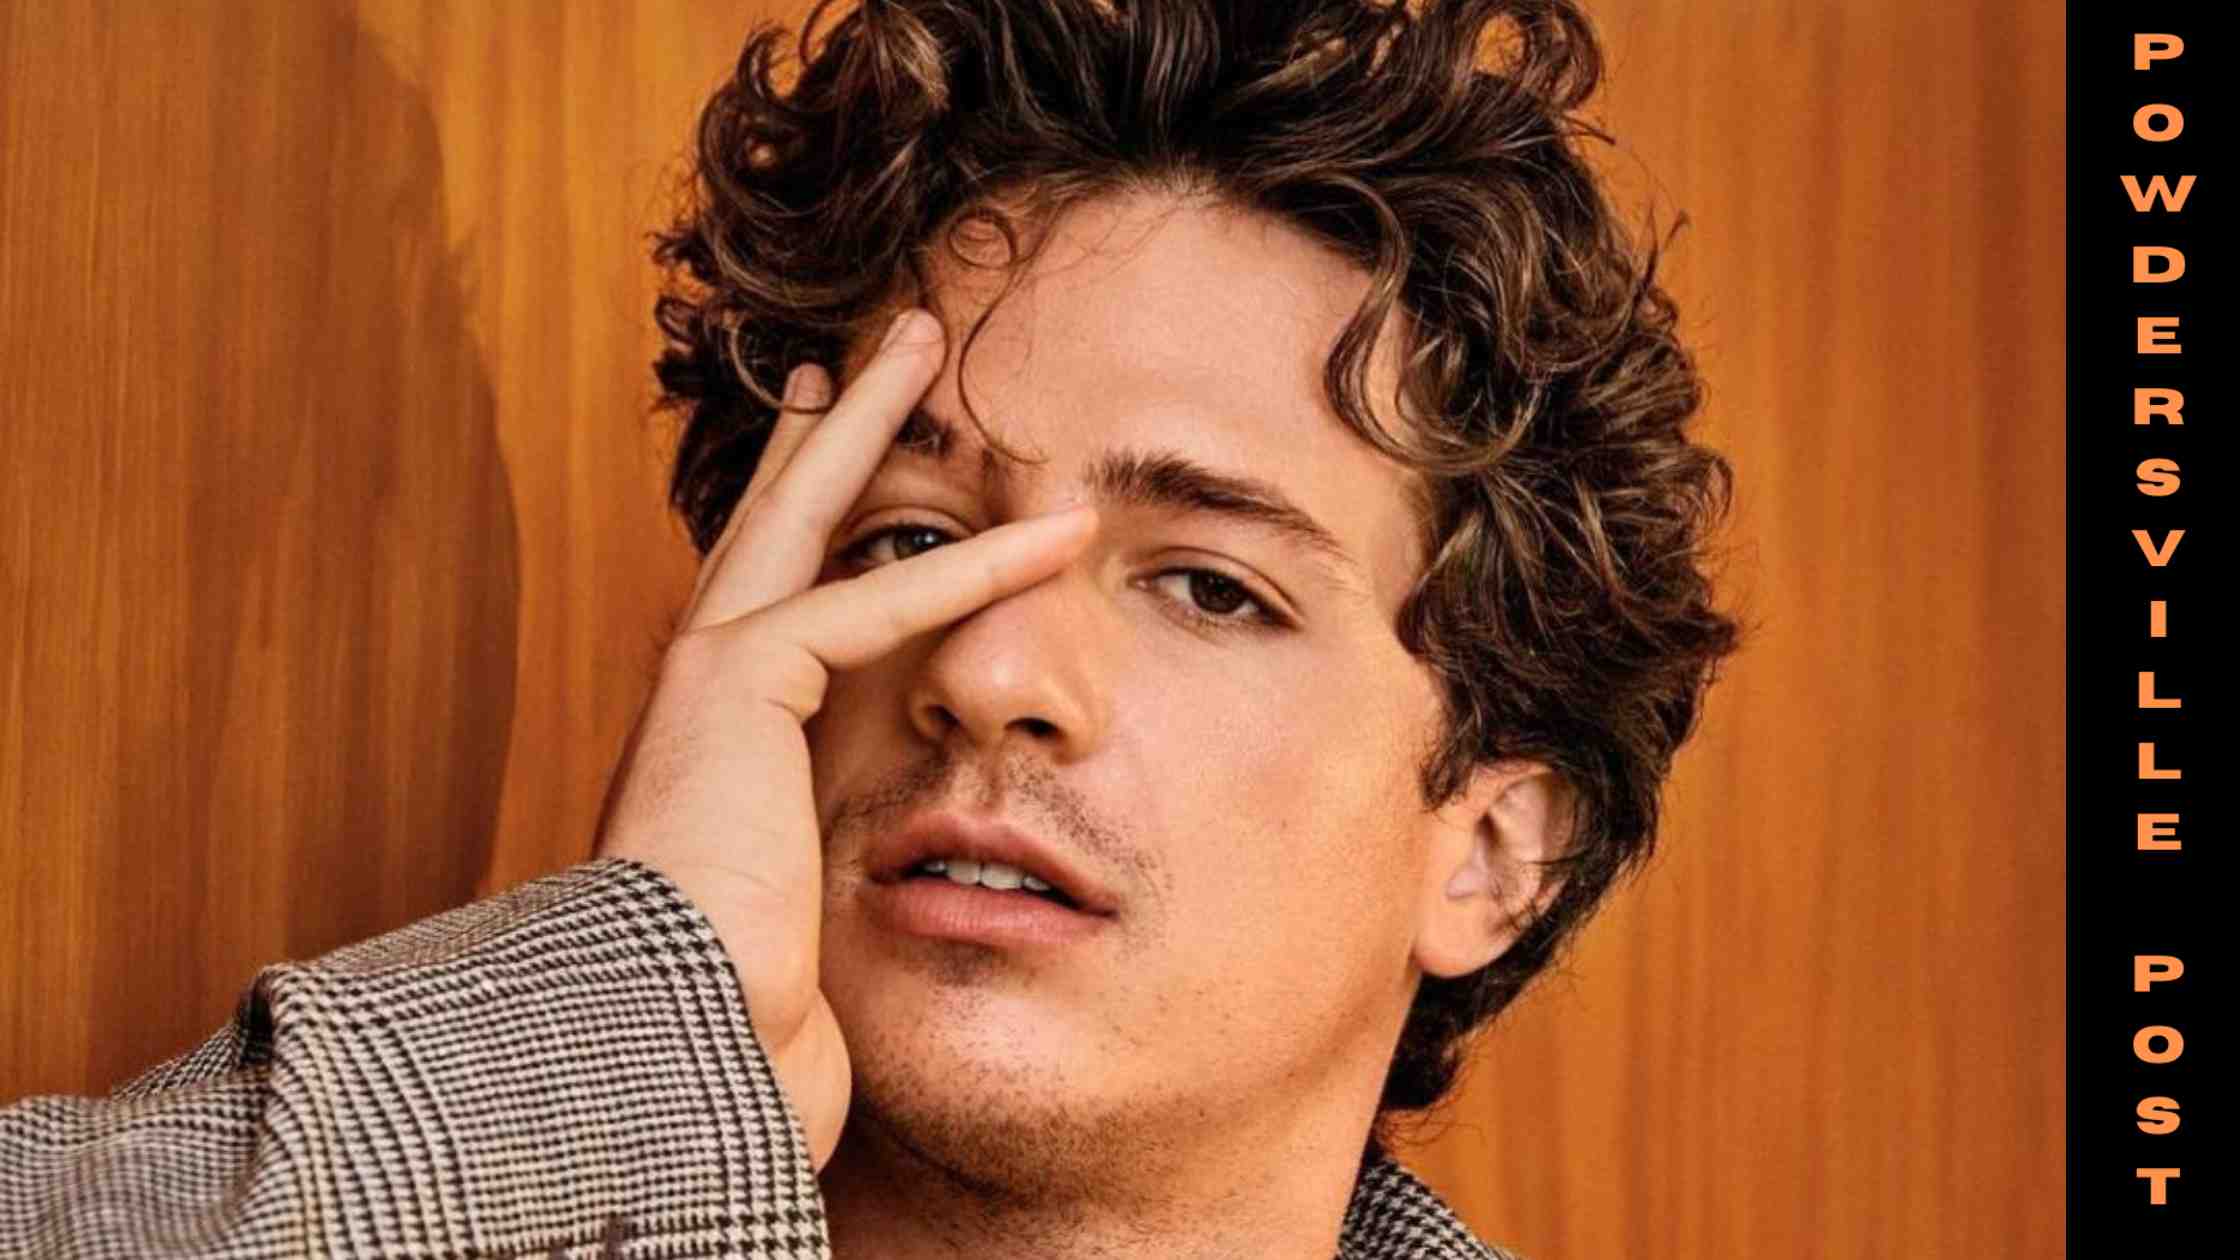 Speculation Start Arising That Pop Singer  Charlie Puth Is Gay Fans React The Response If It Is True Or Not